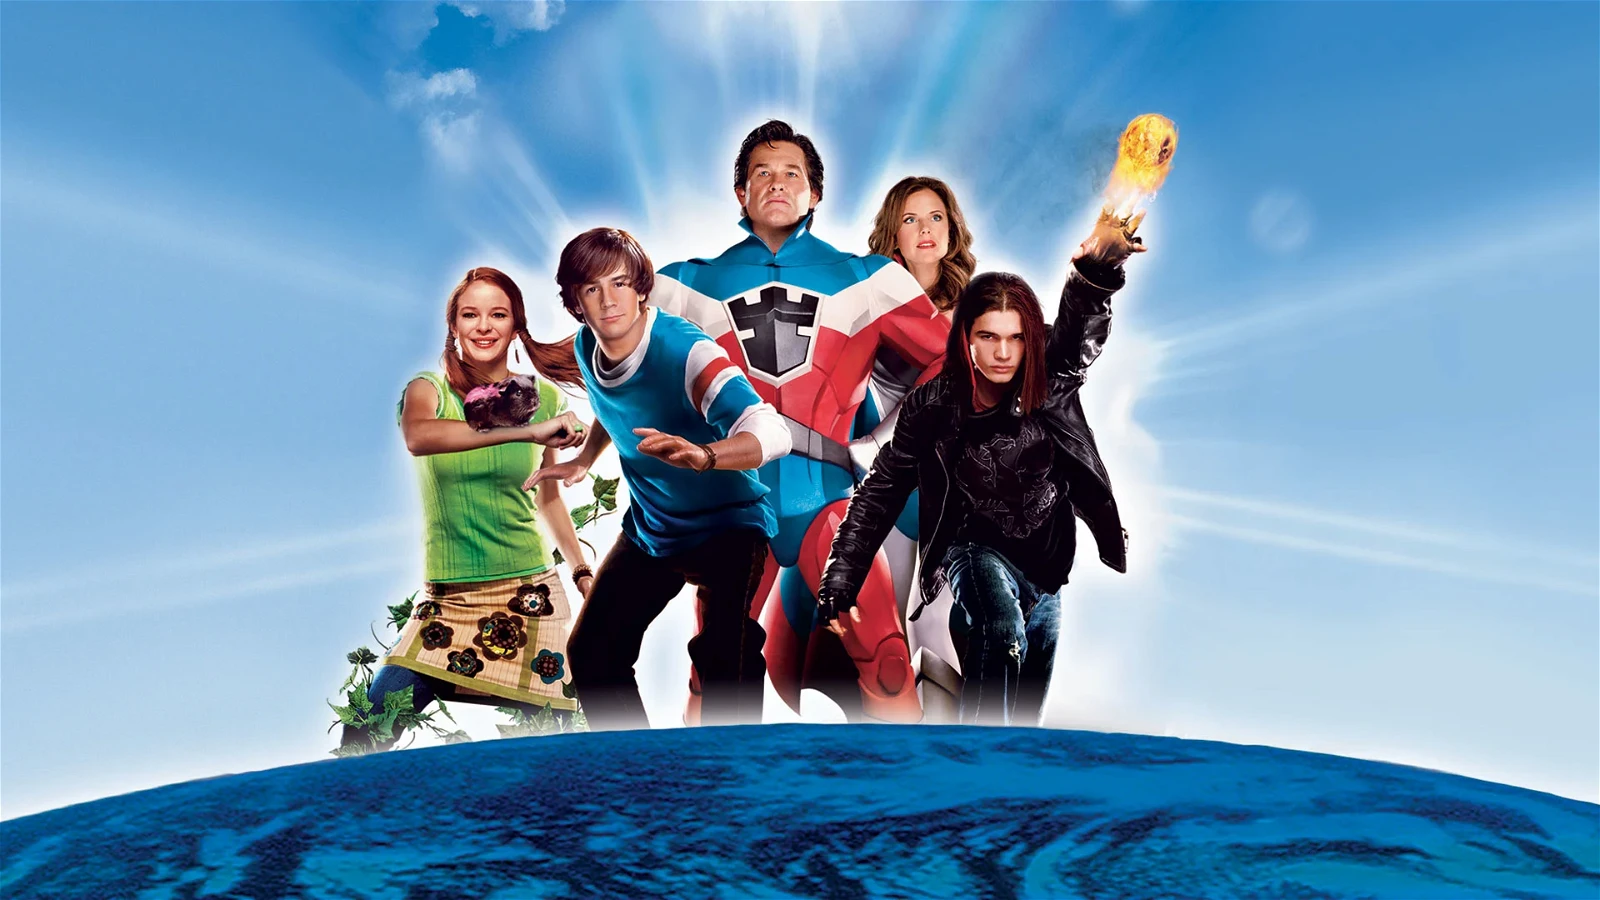 The official poster of Sky High | Walt Disney Pictures